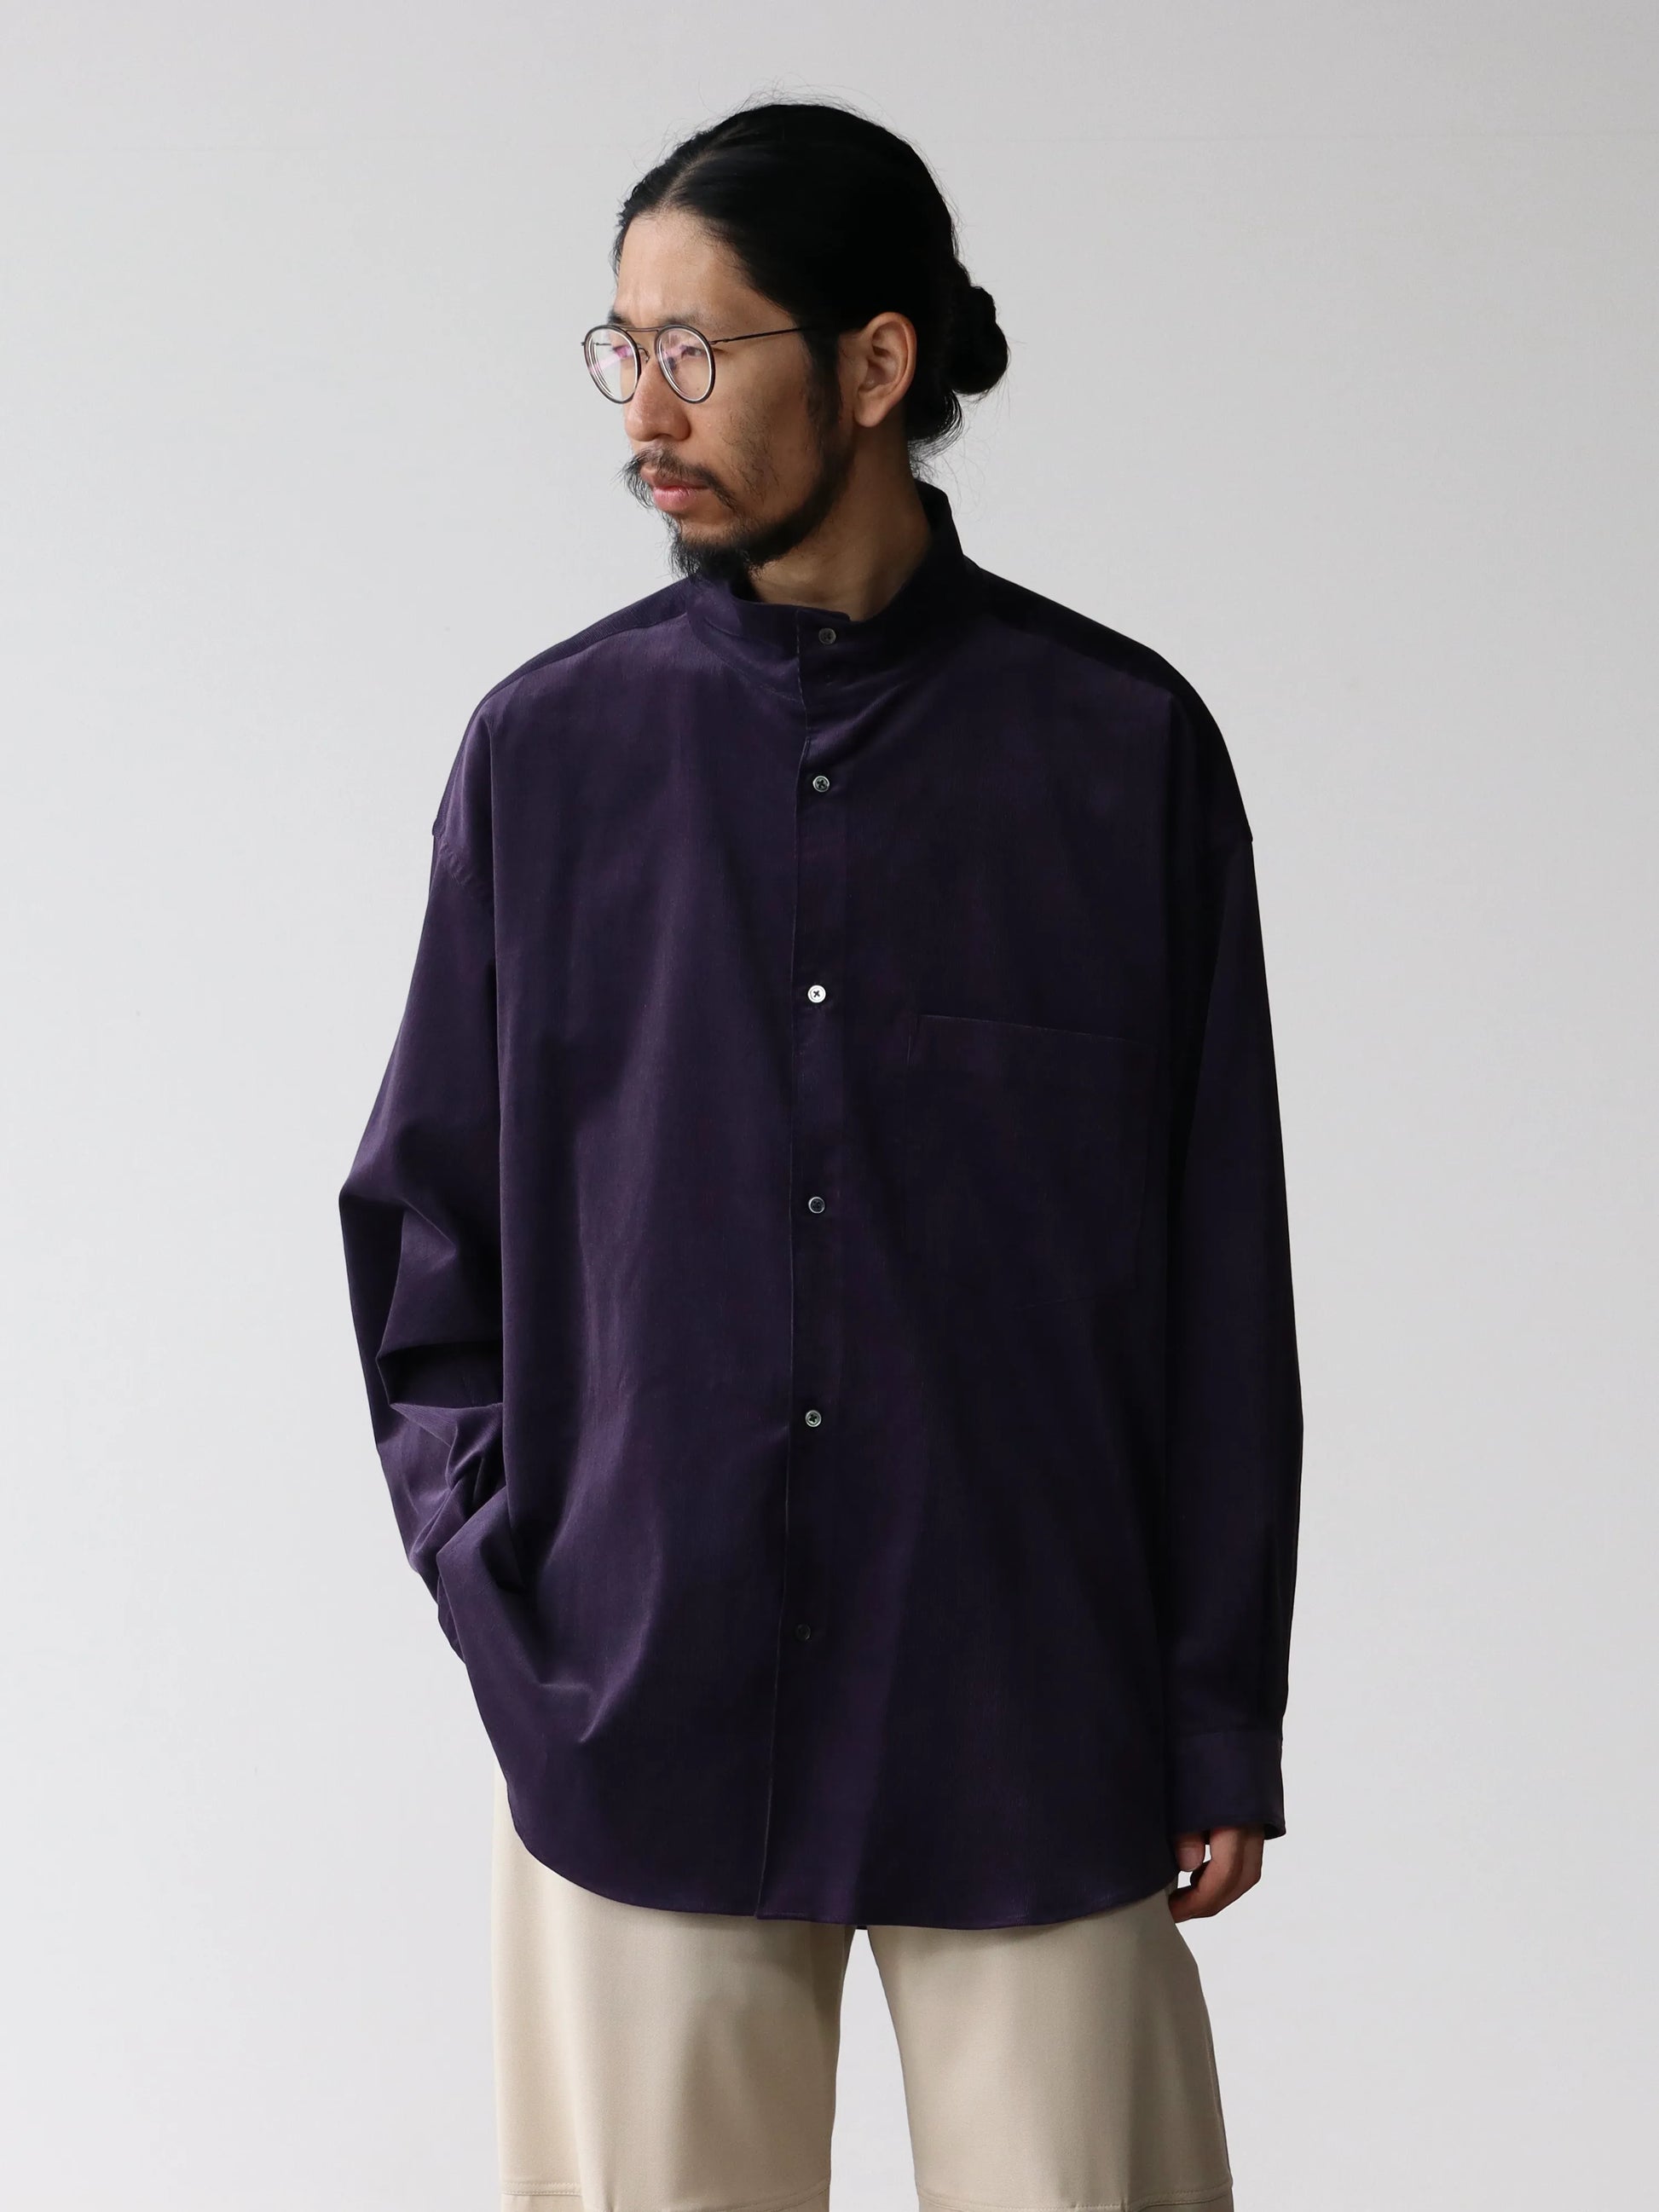 SuvinCoGraphpaper Suvin Corduroy Shirt - トップス